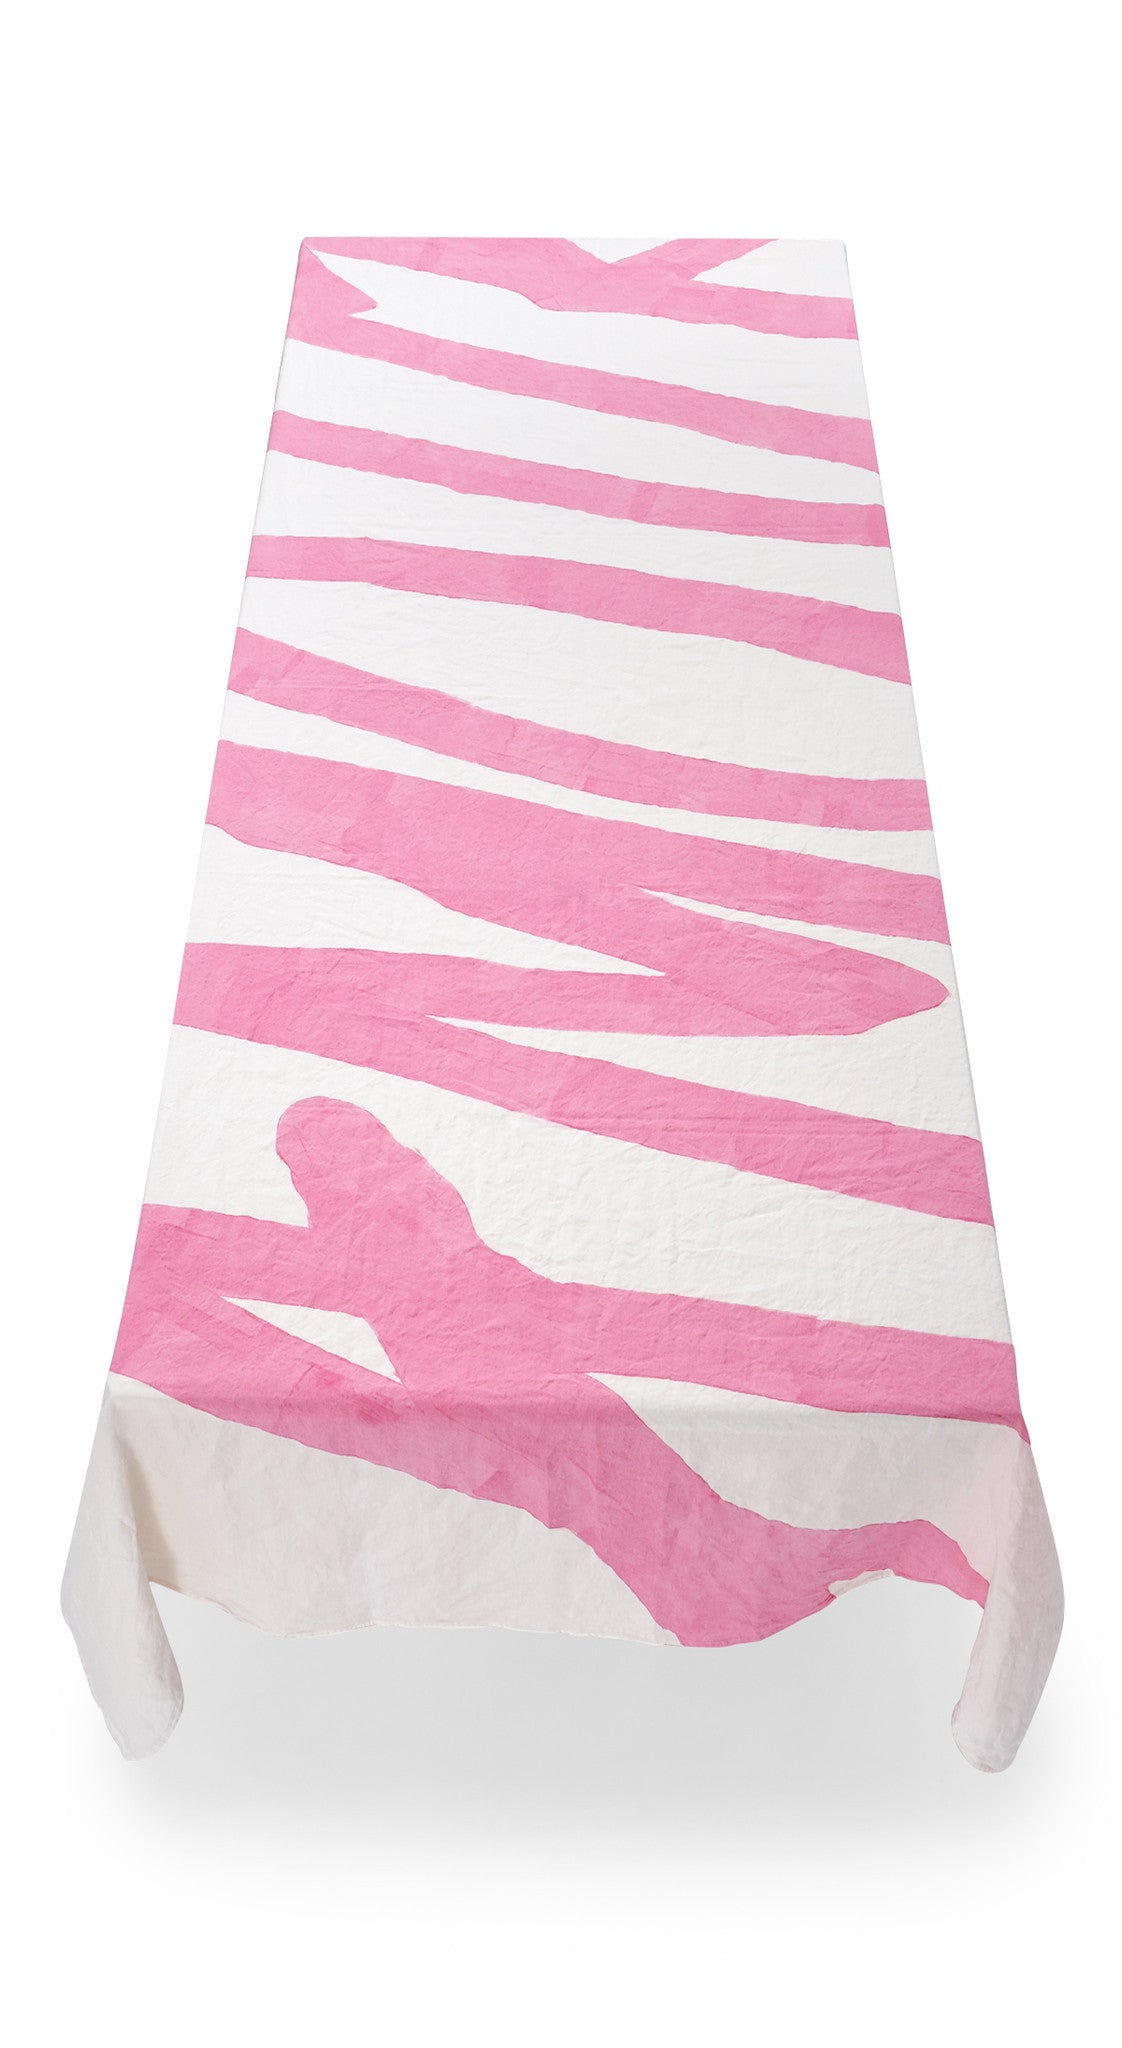 Amour Word Linen Tablecloth in Rose Pink